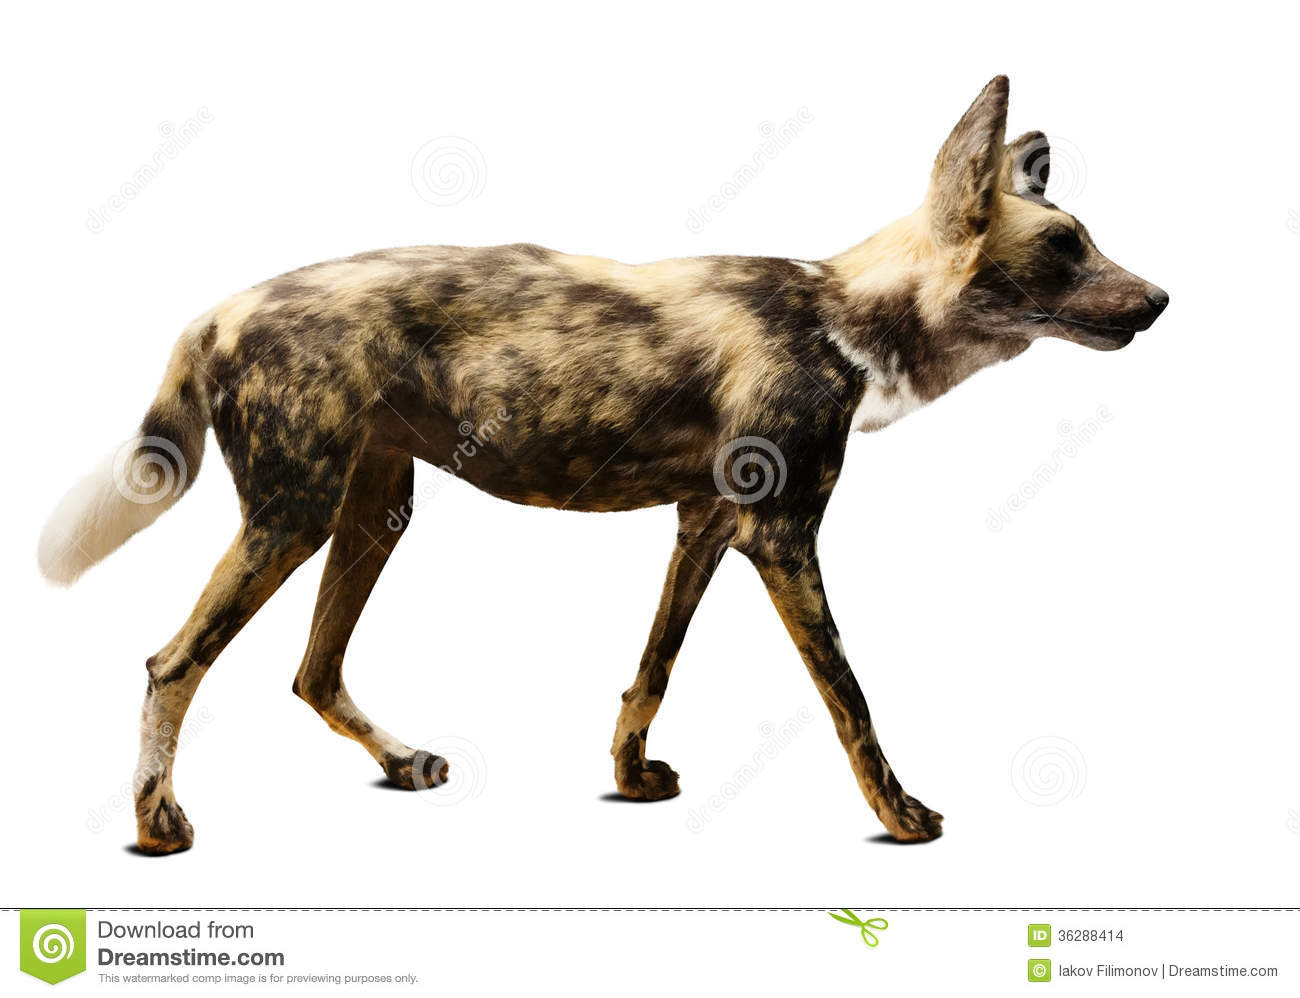     Dog  Lycaon Pictus   Isolated Over White Background With Shade